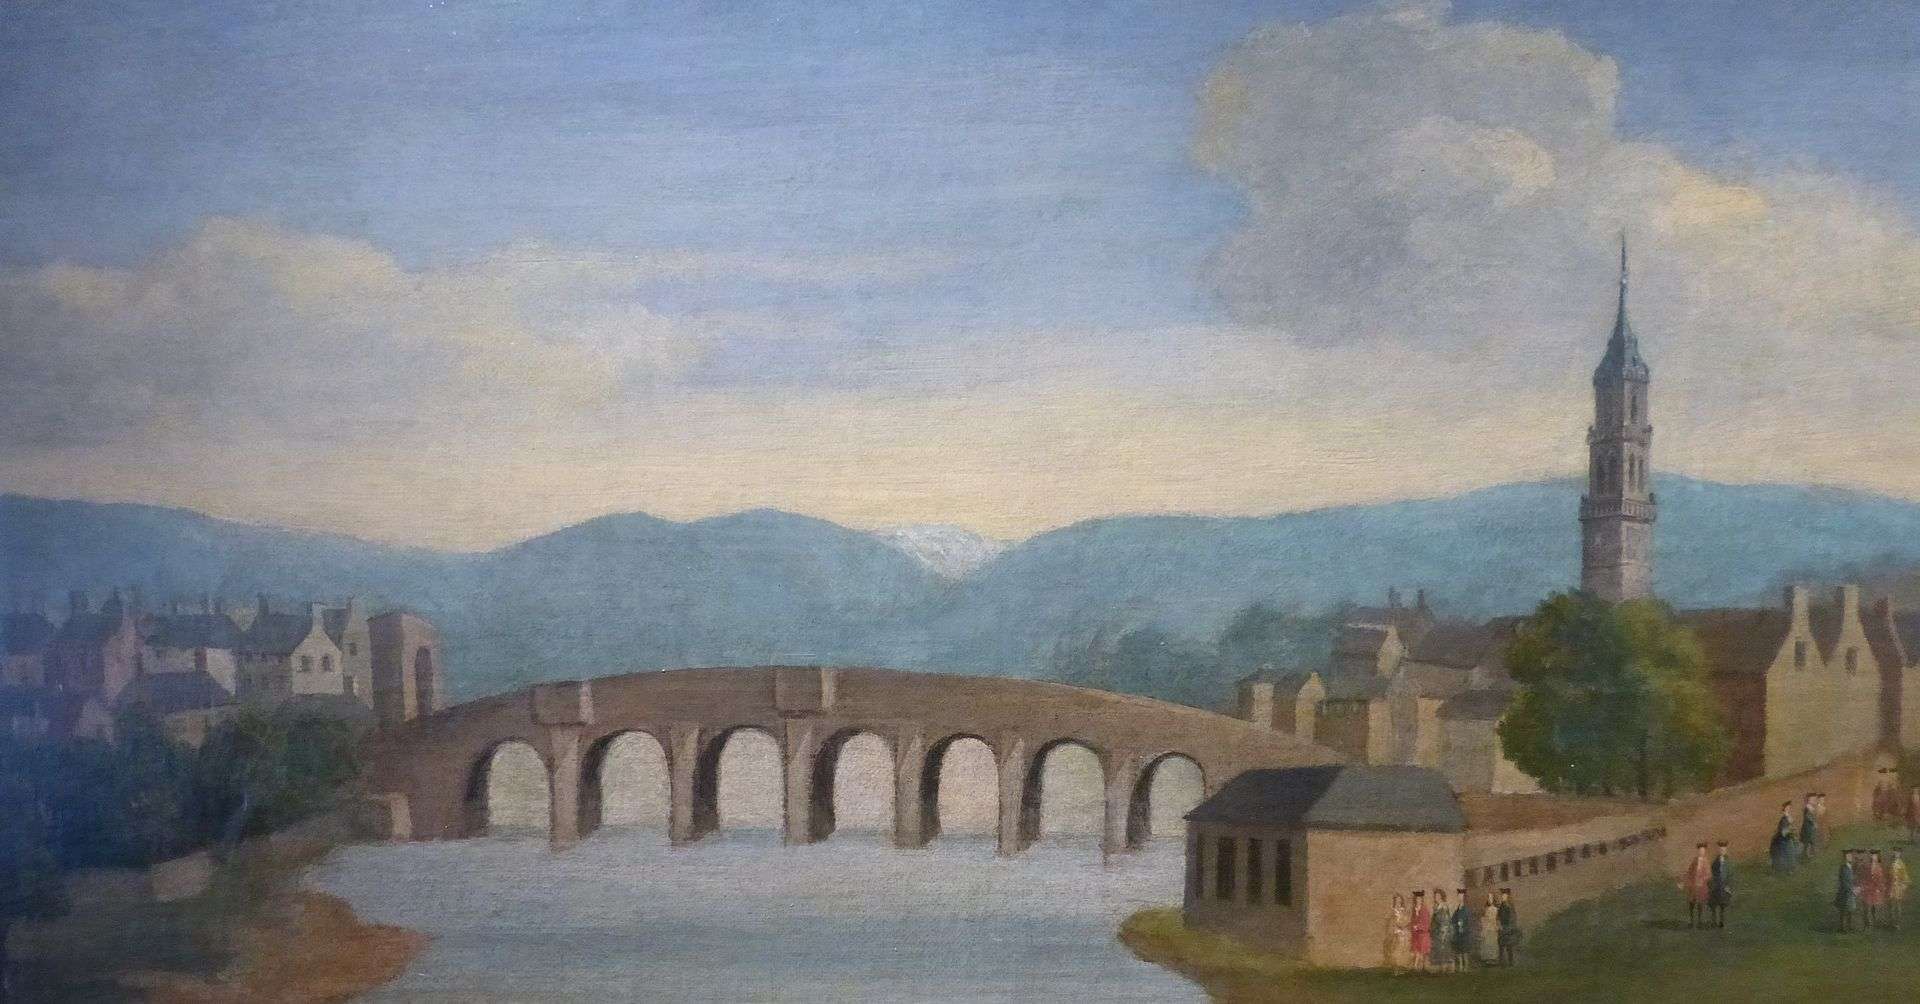 Glasgow Bridge as Defoe might have seen it in the 18th century